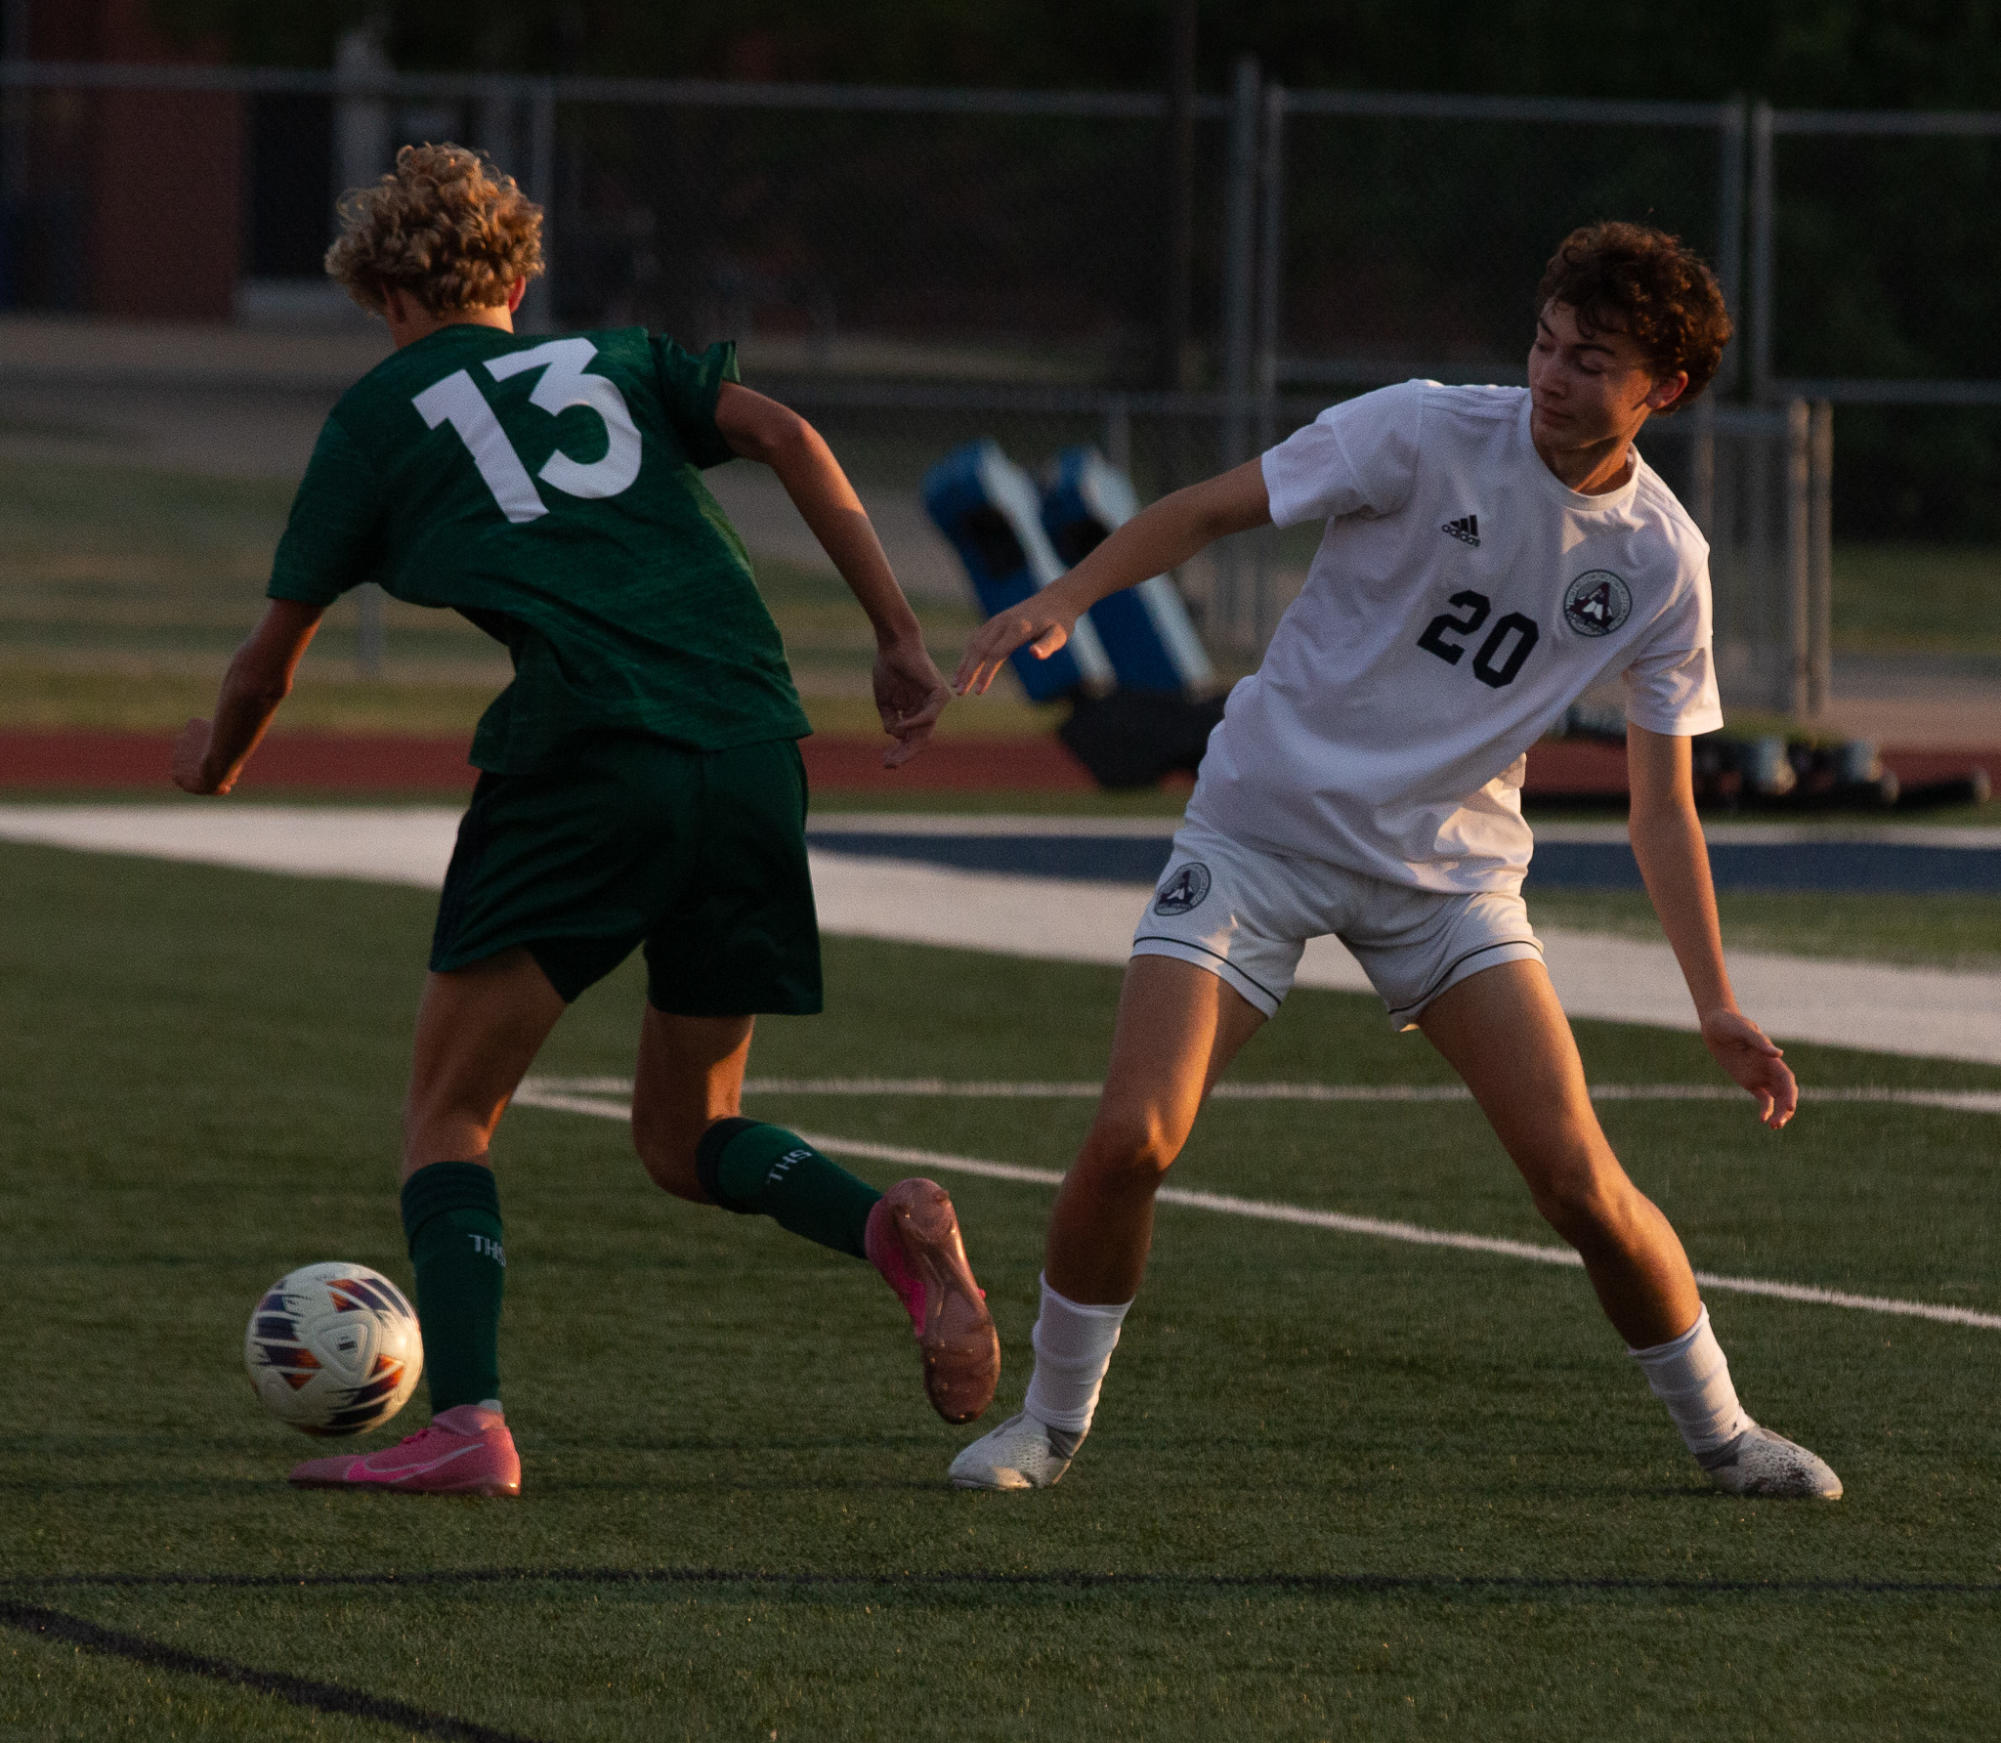 Junior Adam Doria fights to retrieve the ball from his opponent. This was before their first goal of the game so Doria was determined to keep the ball on their side.